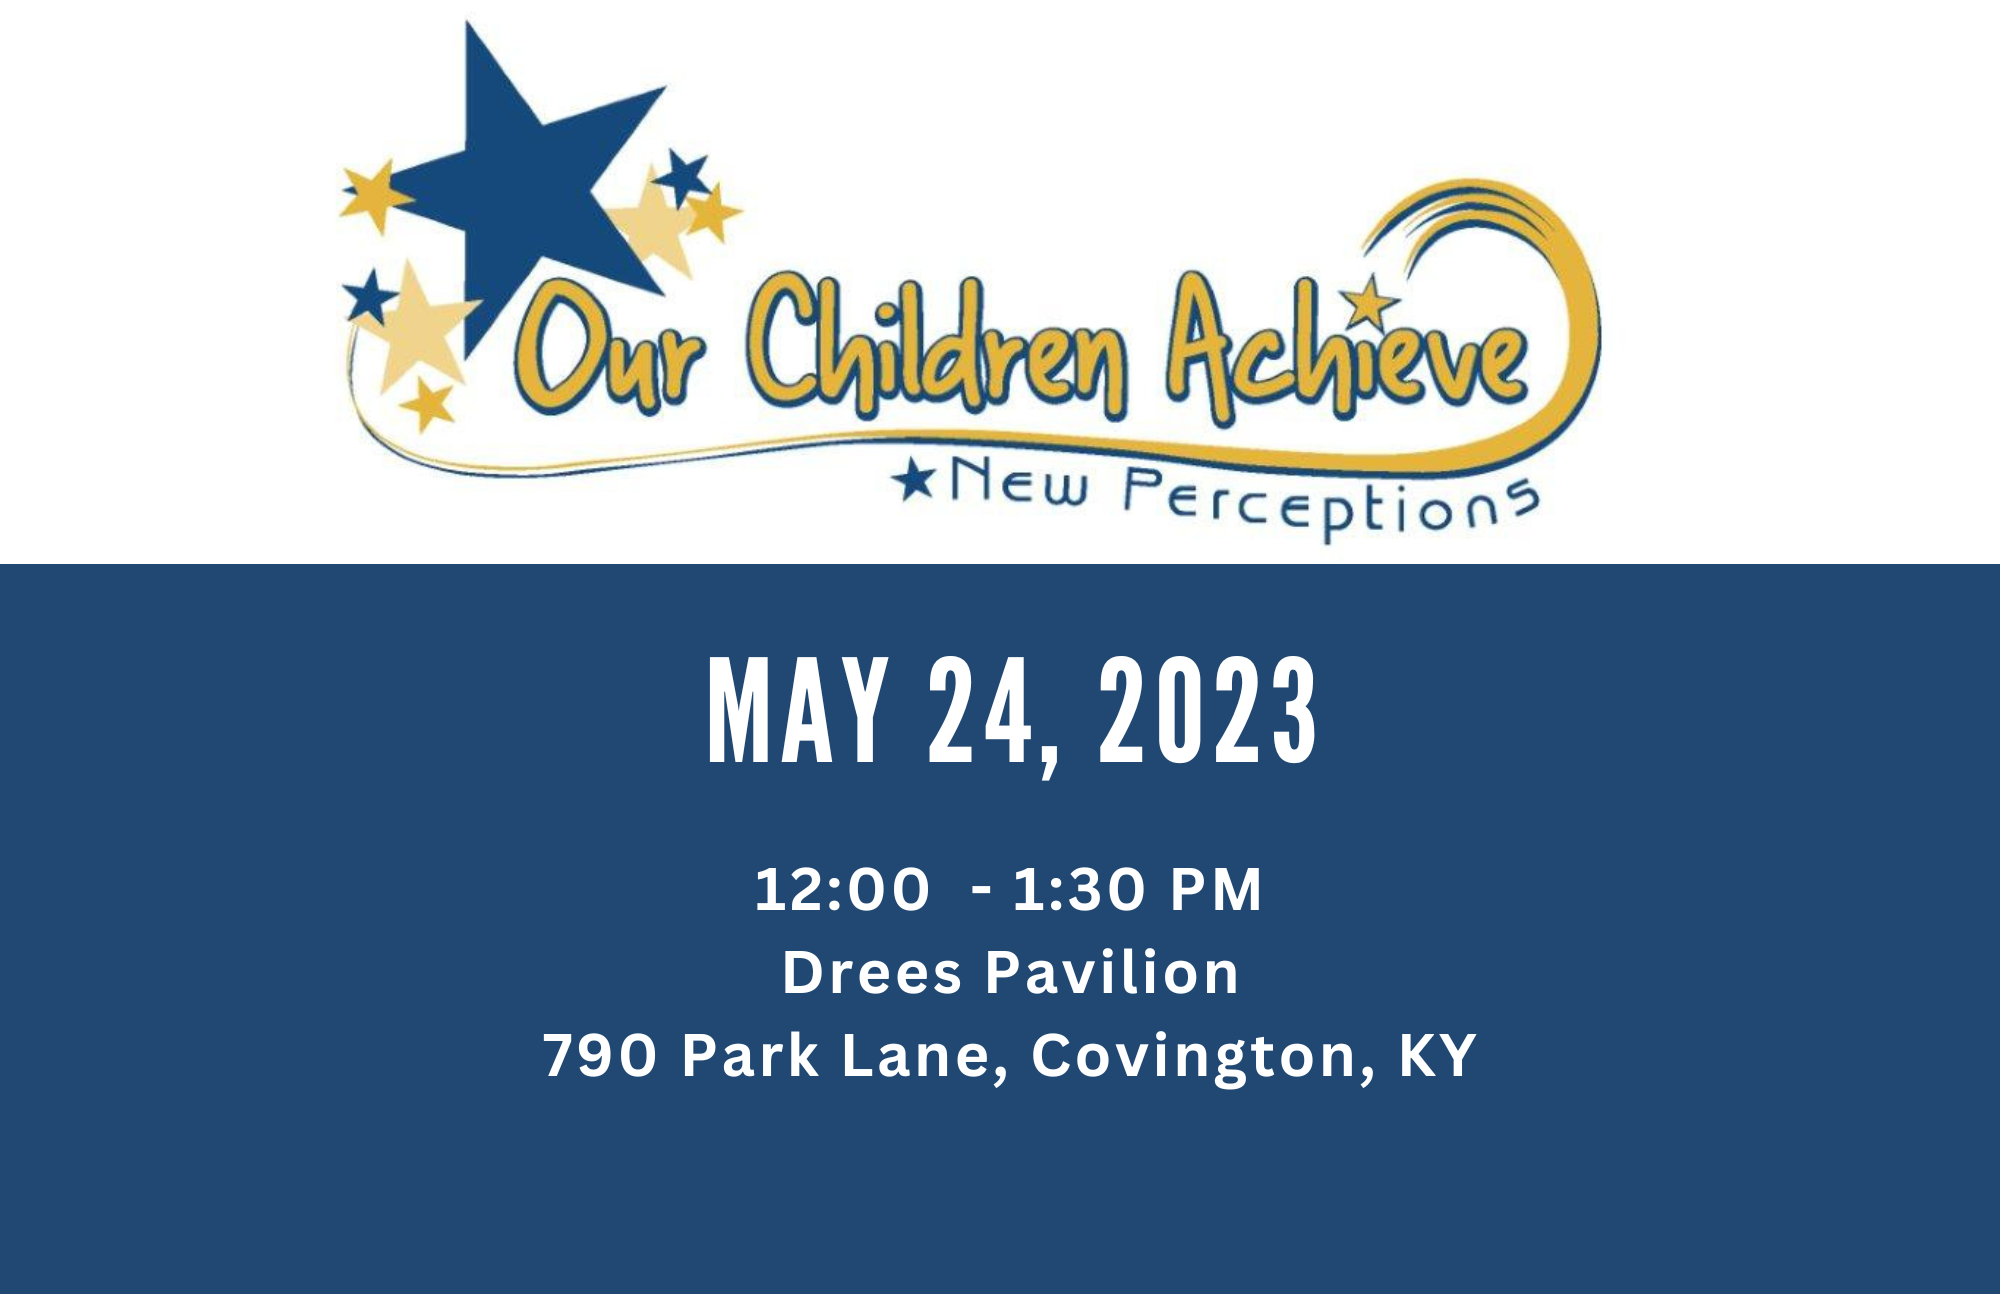 Our Children Achieve takes place on May 24, 2023